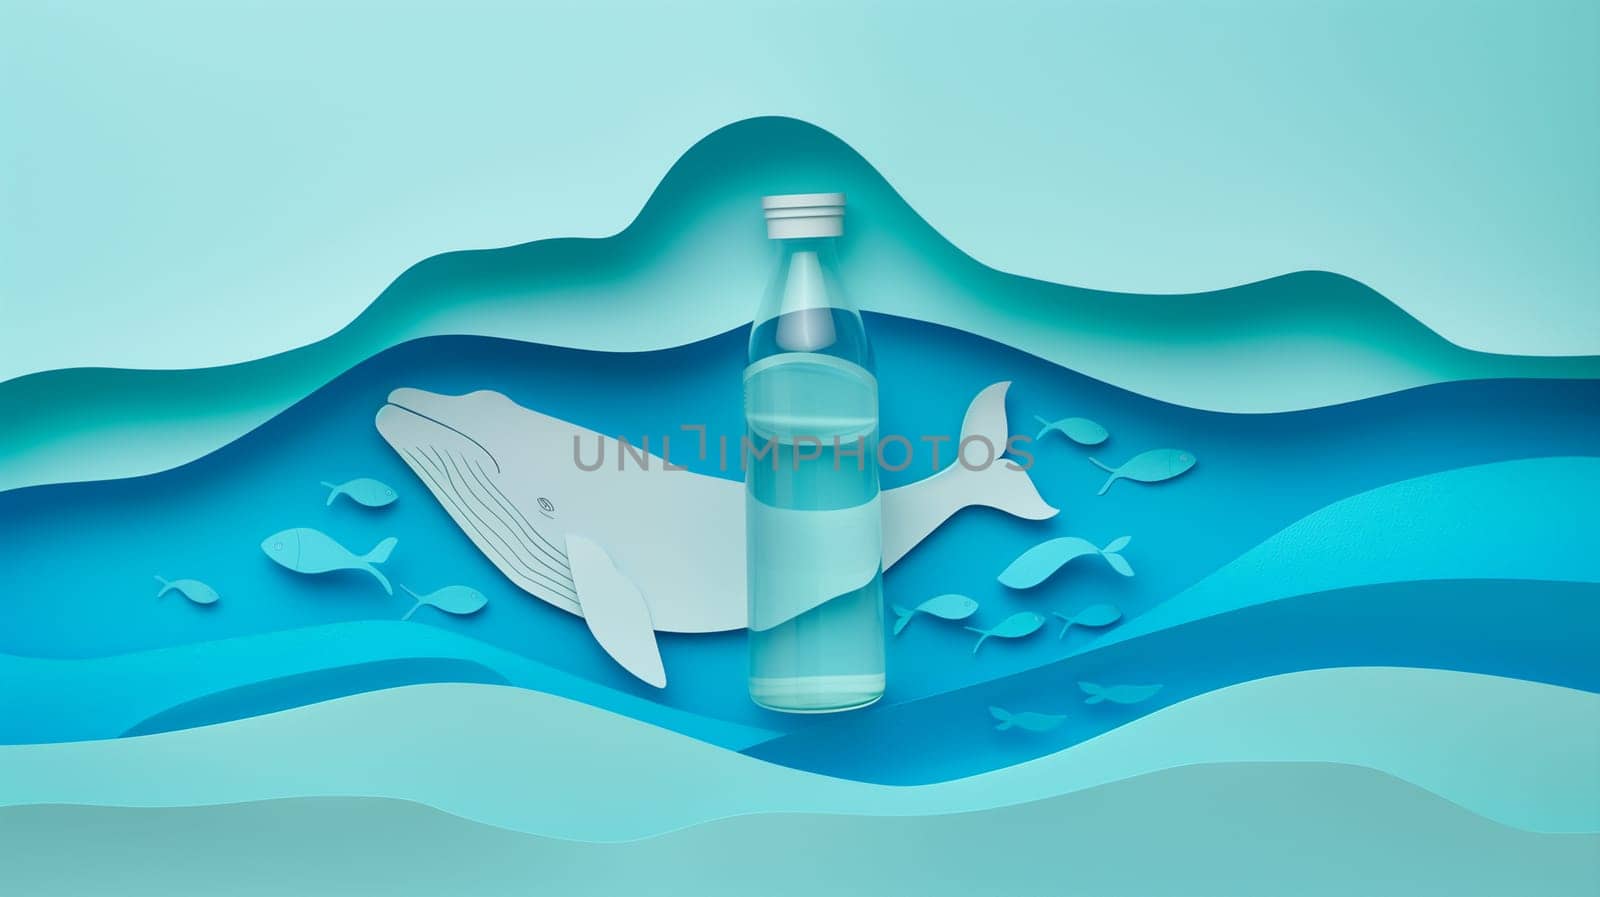 A paper bottle holds a tiny whale figurine inside, symbolizing the importance of protecting marine life on World Oceans Day.